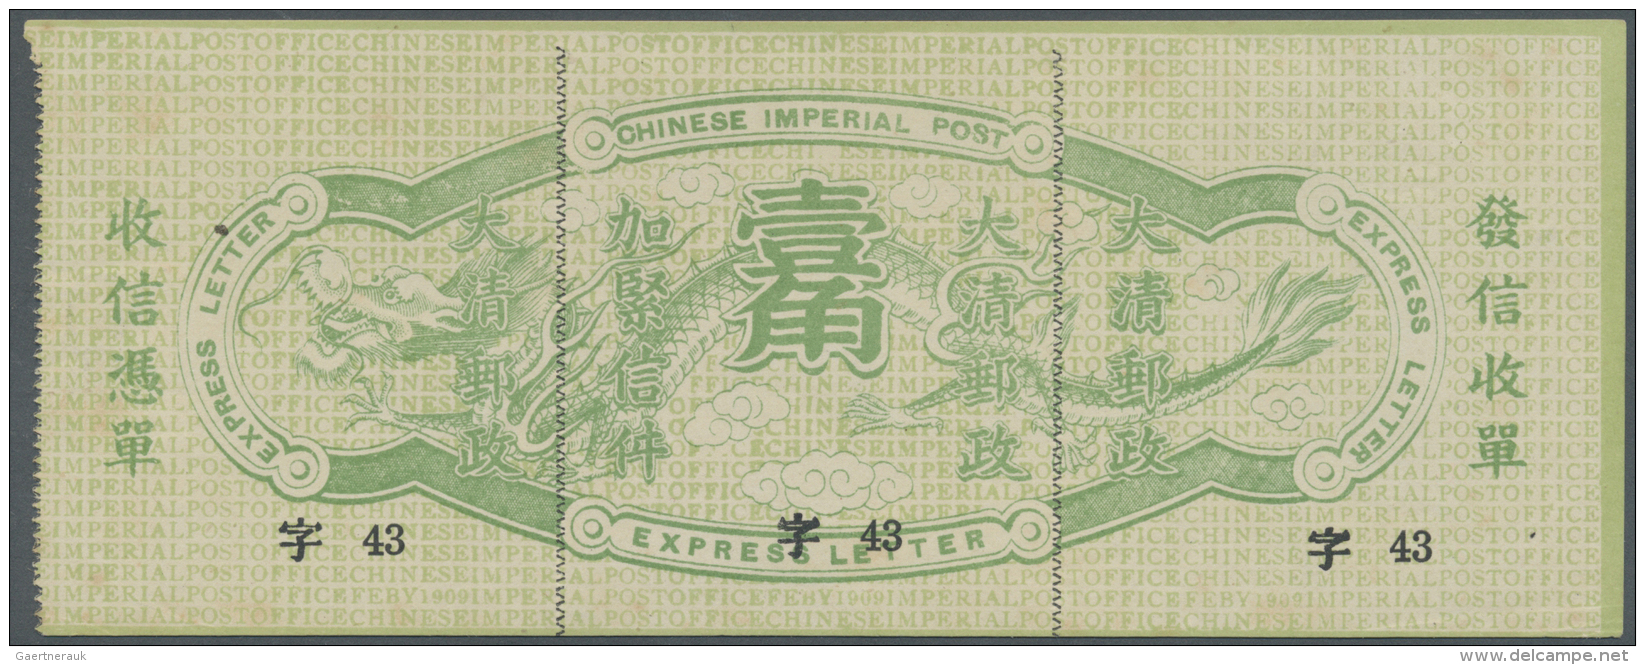 China: 1909, Express Stamp 10 C. Pale Green/yellow, 4th Type, Sections 2-4, Unused Mint, Scarce (Chang No. E4). - 1912-1949 Republic